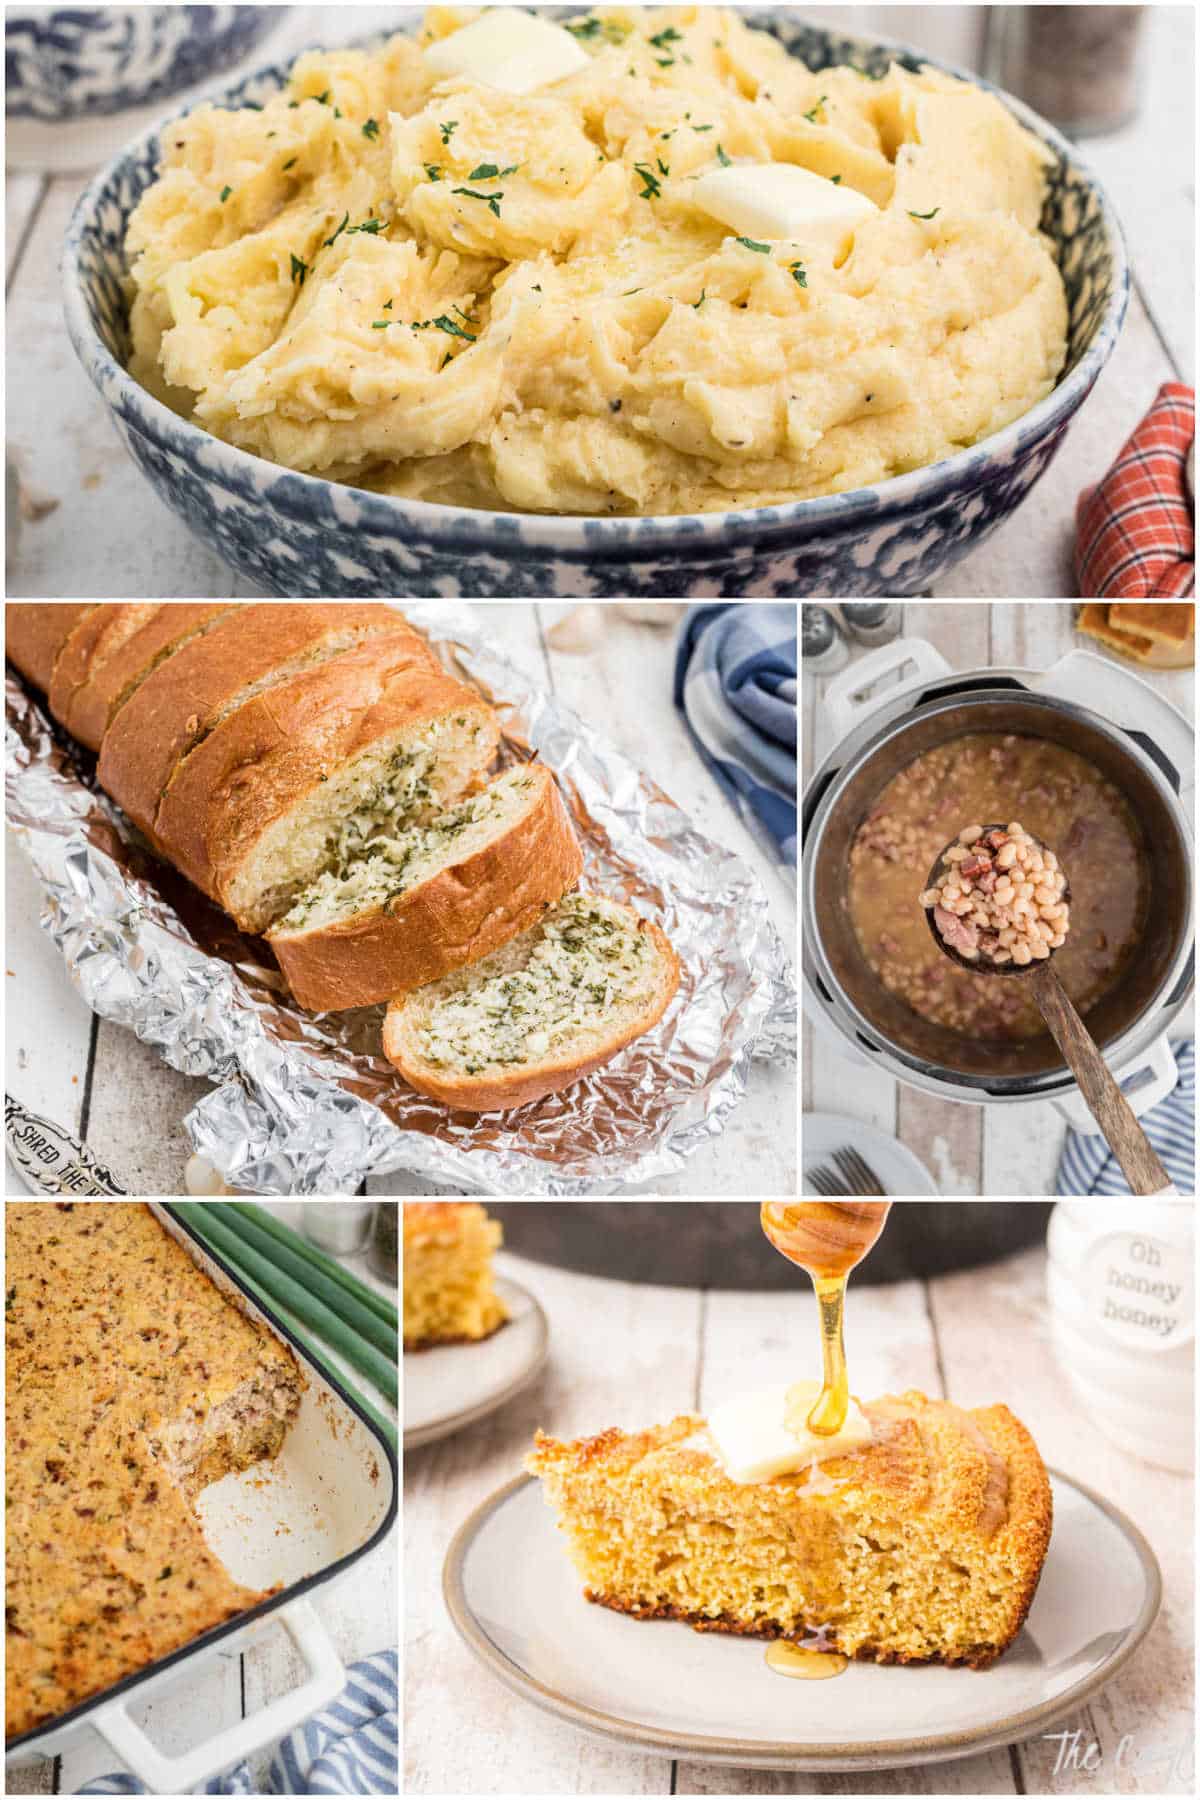 Collage of five images showing examples of what could be served with cabbage rolls.